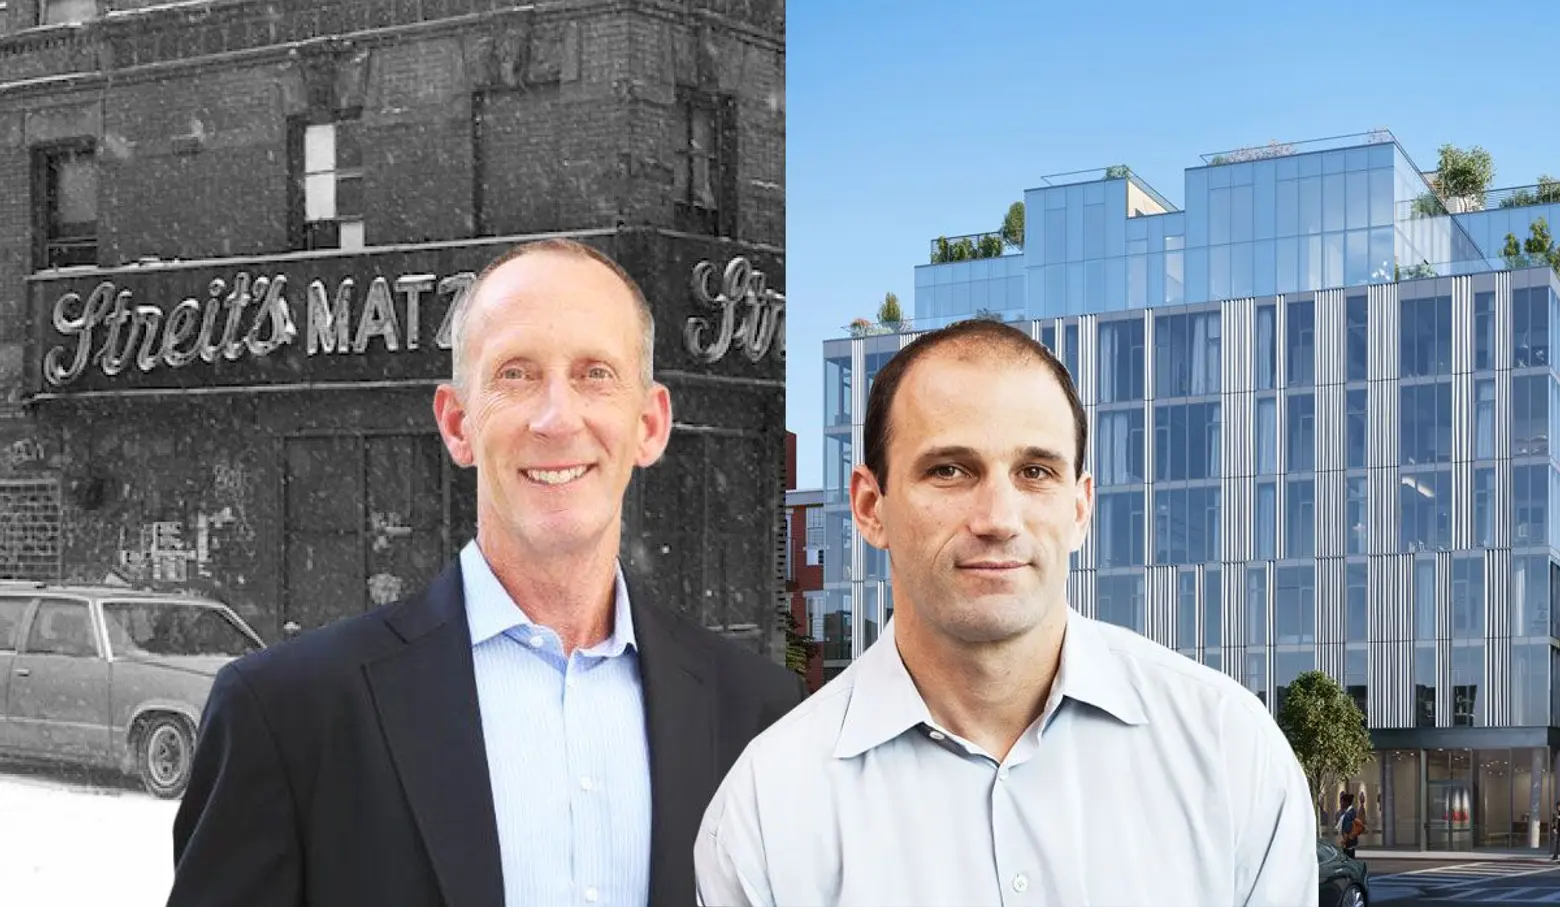 Reimagining Streit’s Matzo Factory on the Lower East Side: Two perspectives